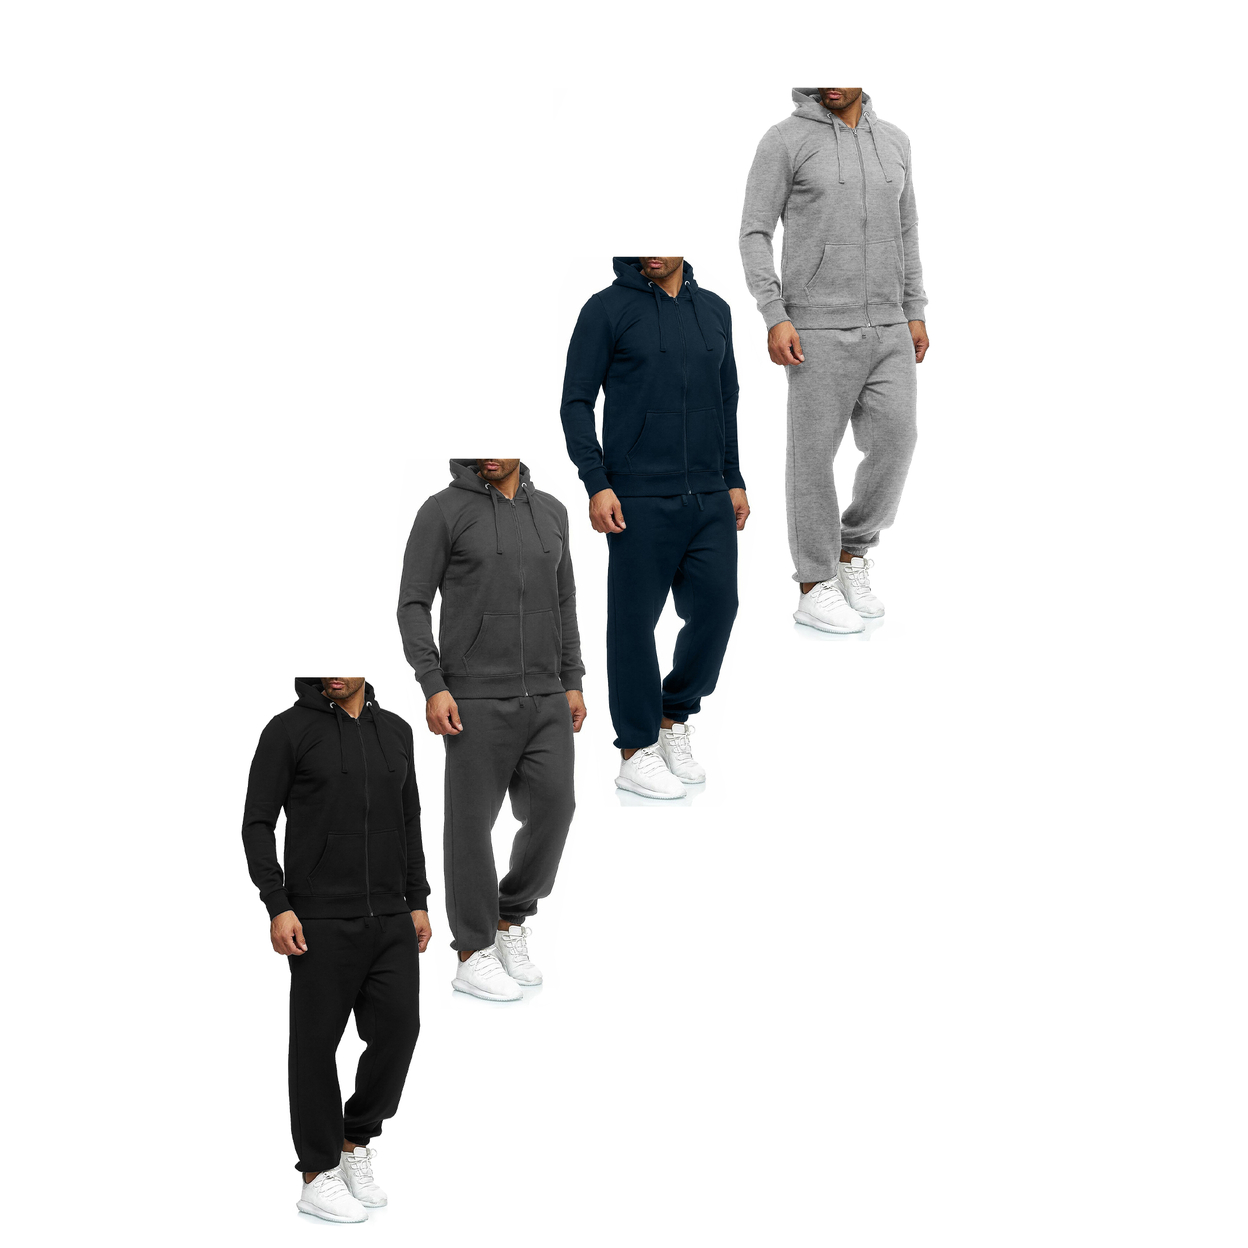 Multi-Pack: Men's Casual Big & Tall Athletic Active Winter Warm Fleece Lined Full Zip Tracksuit Jogger Set - Grey, 2-pack, Xx-large